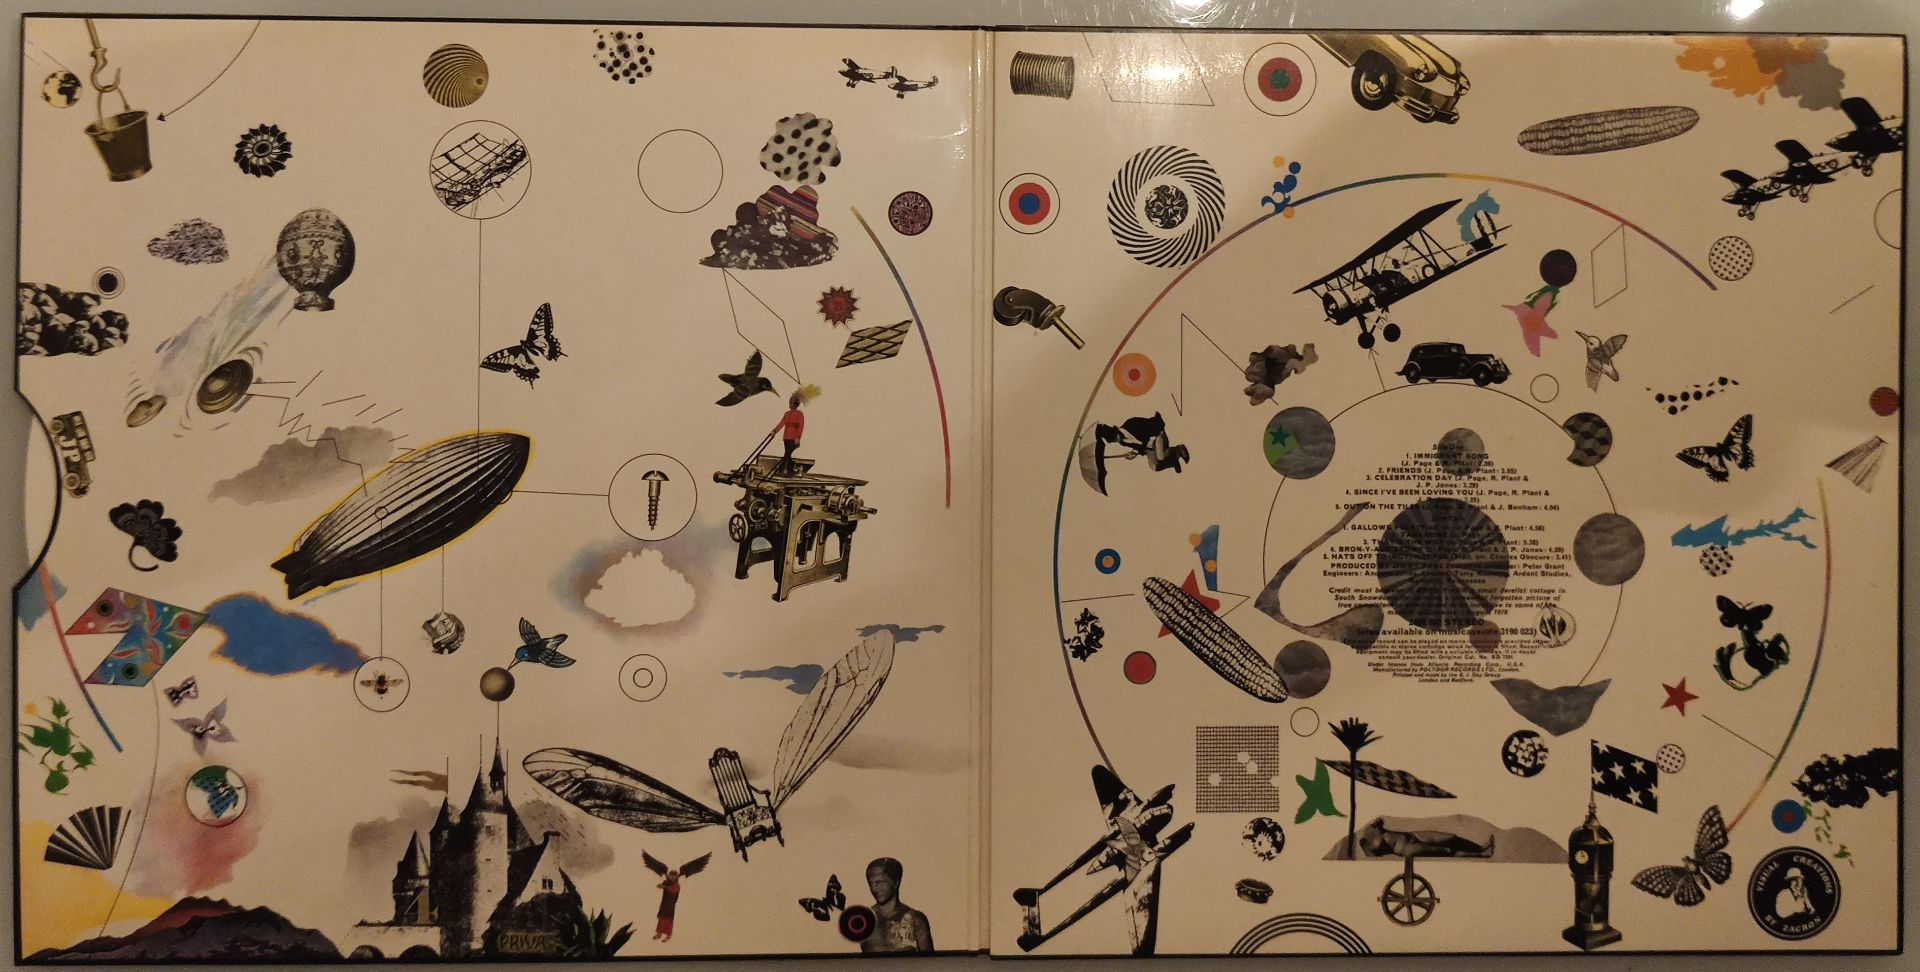 Led Zeppelin III UK 1970 1st Pressing - Peter Grant Credit - A5 / B5 - VG+ To EX. - Image 10 of 11